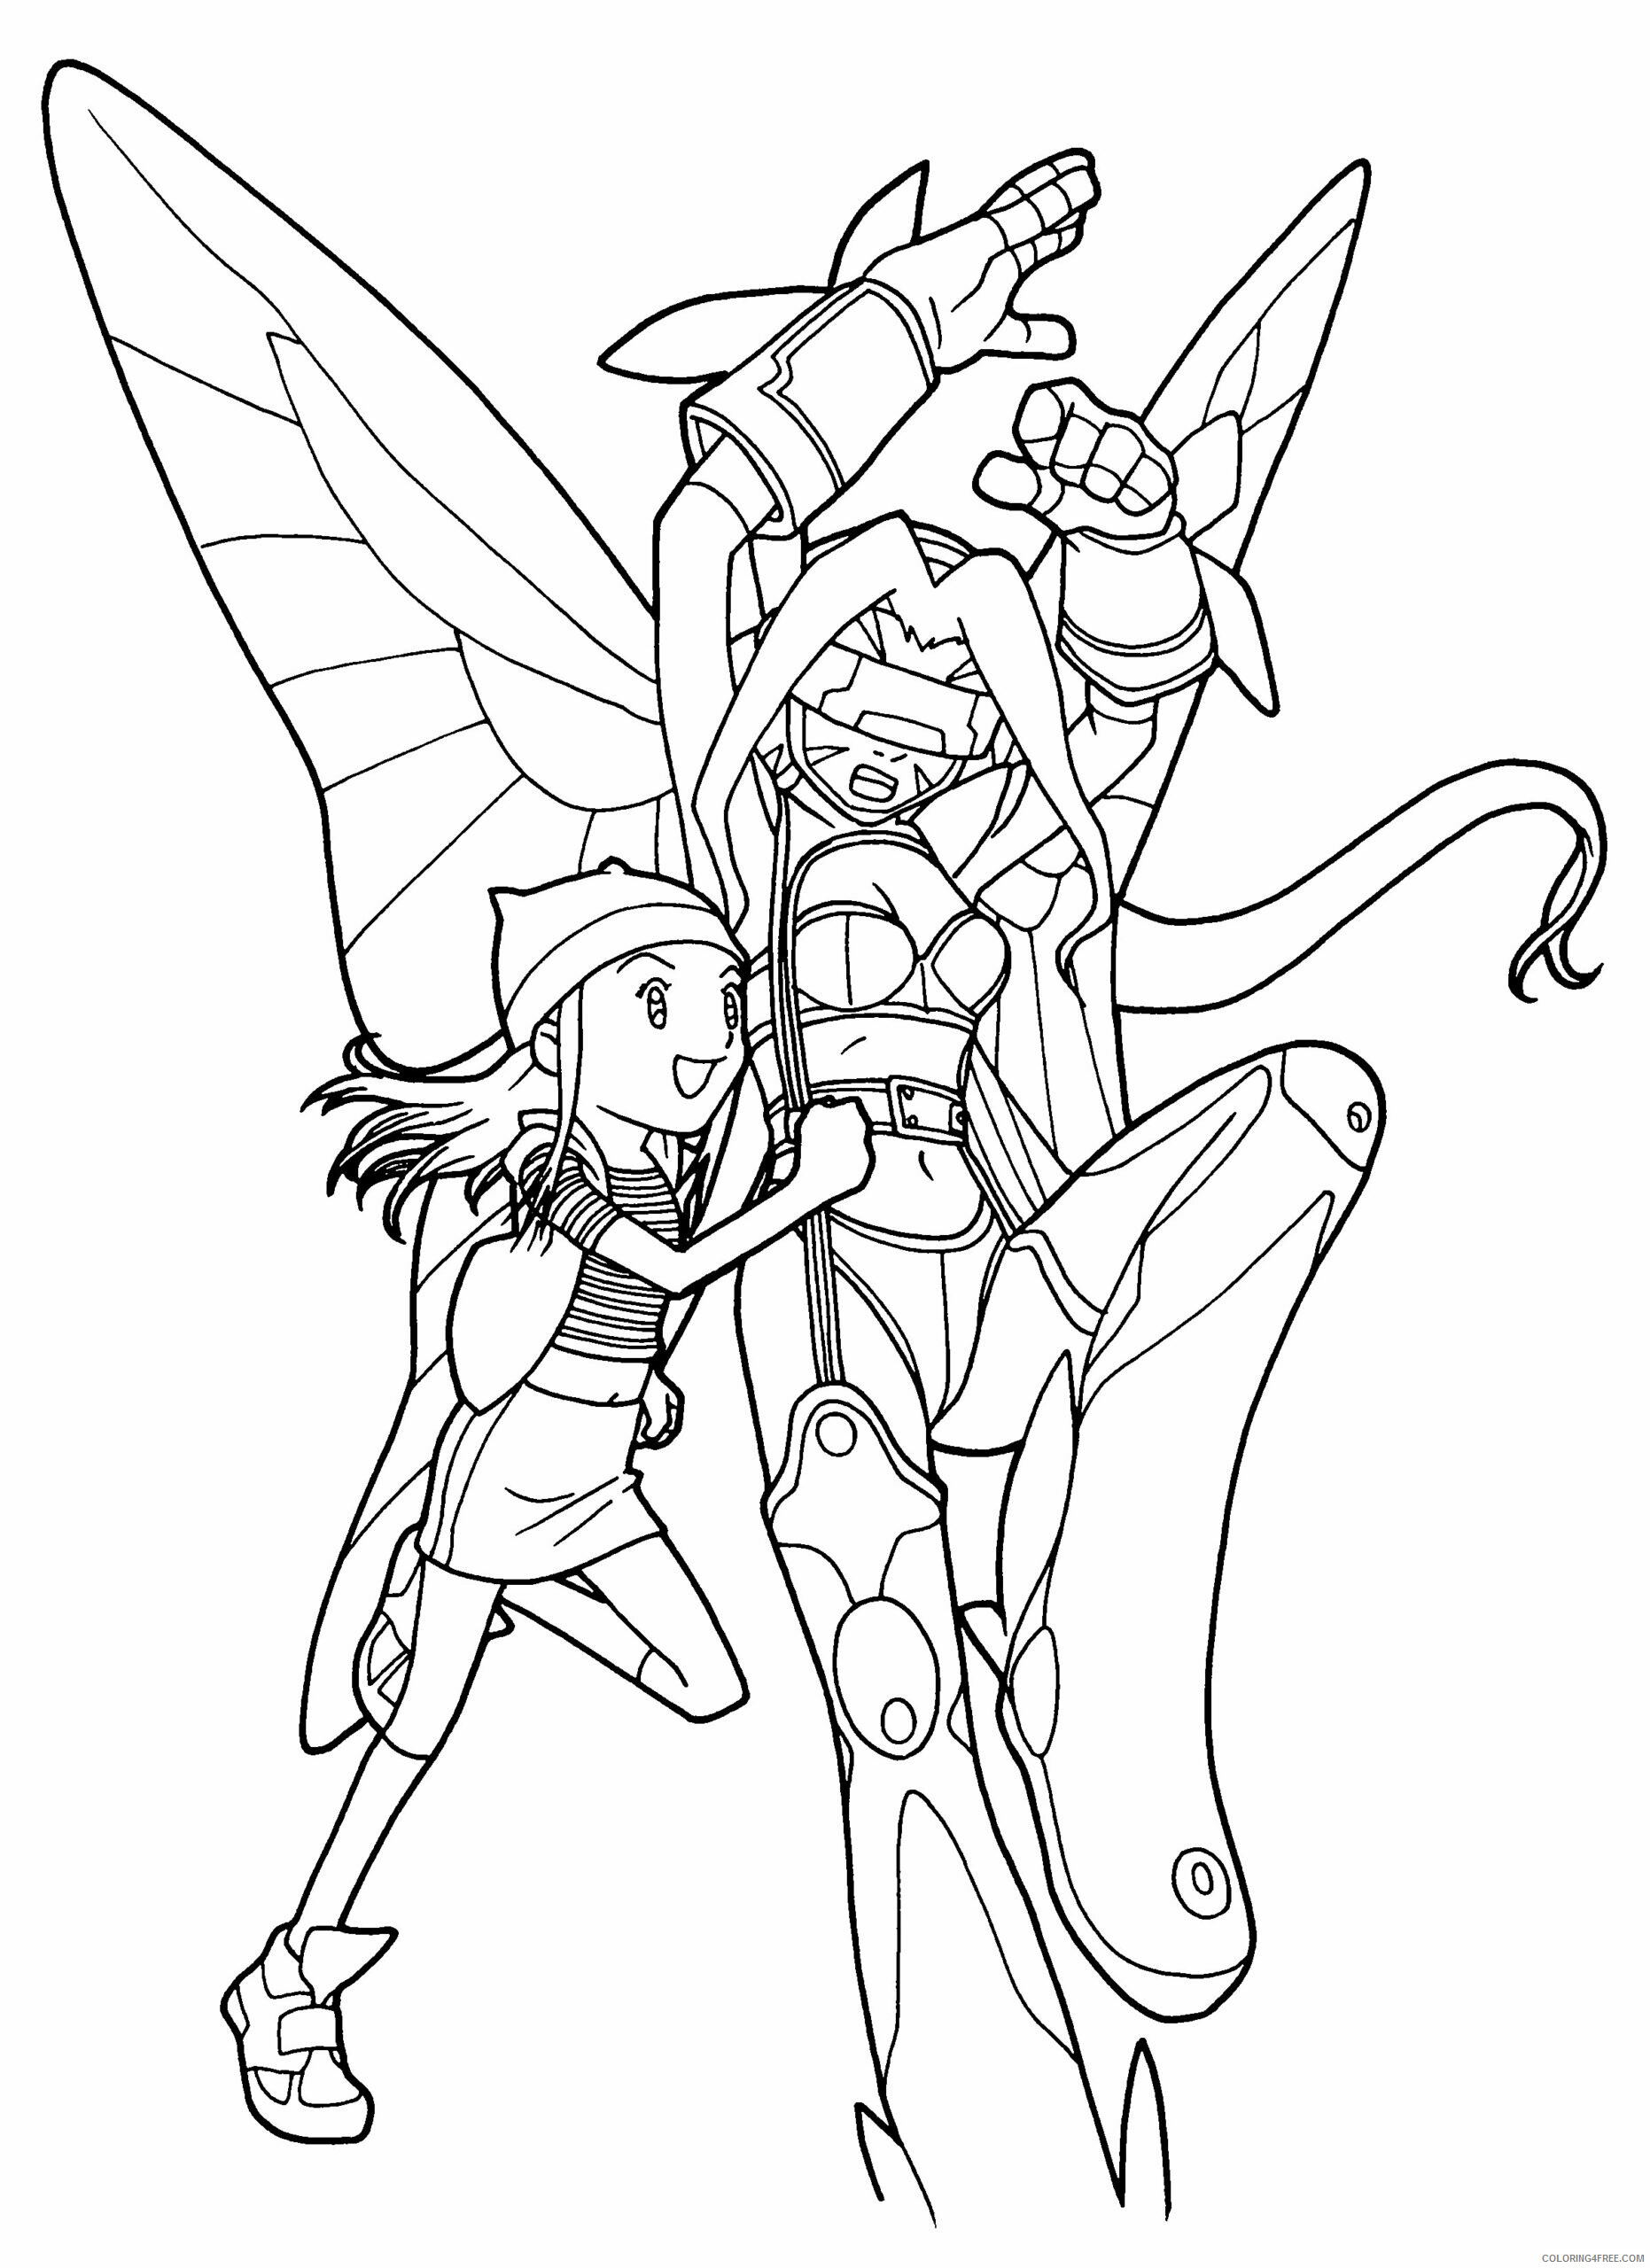 Digimon Printable Coloring Pages Anime digimon 71 2021 0367 Coloring4free